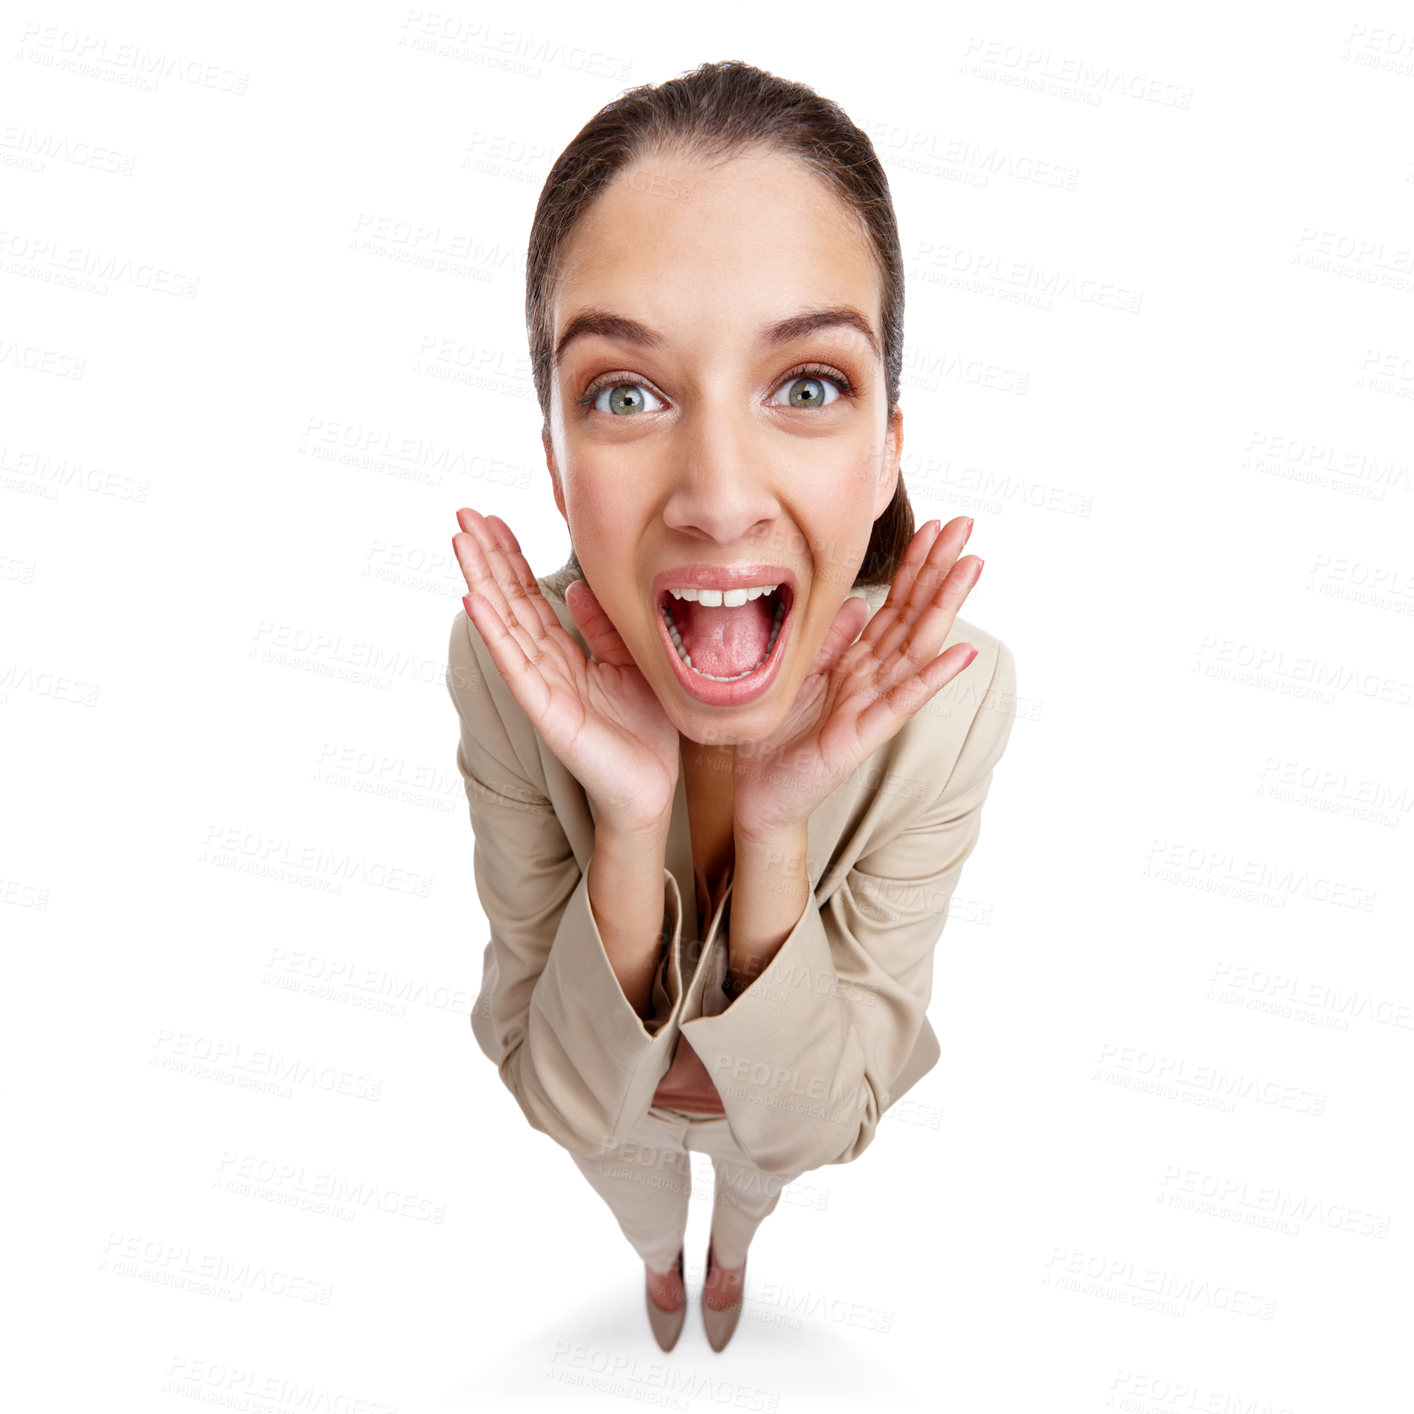 Buy stock photo High angle studio shot of a beautiful young businesswoman shouting out against a white background